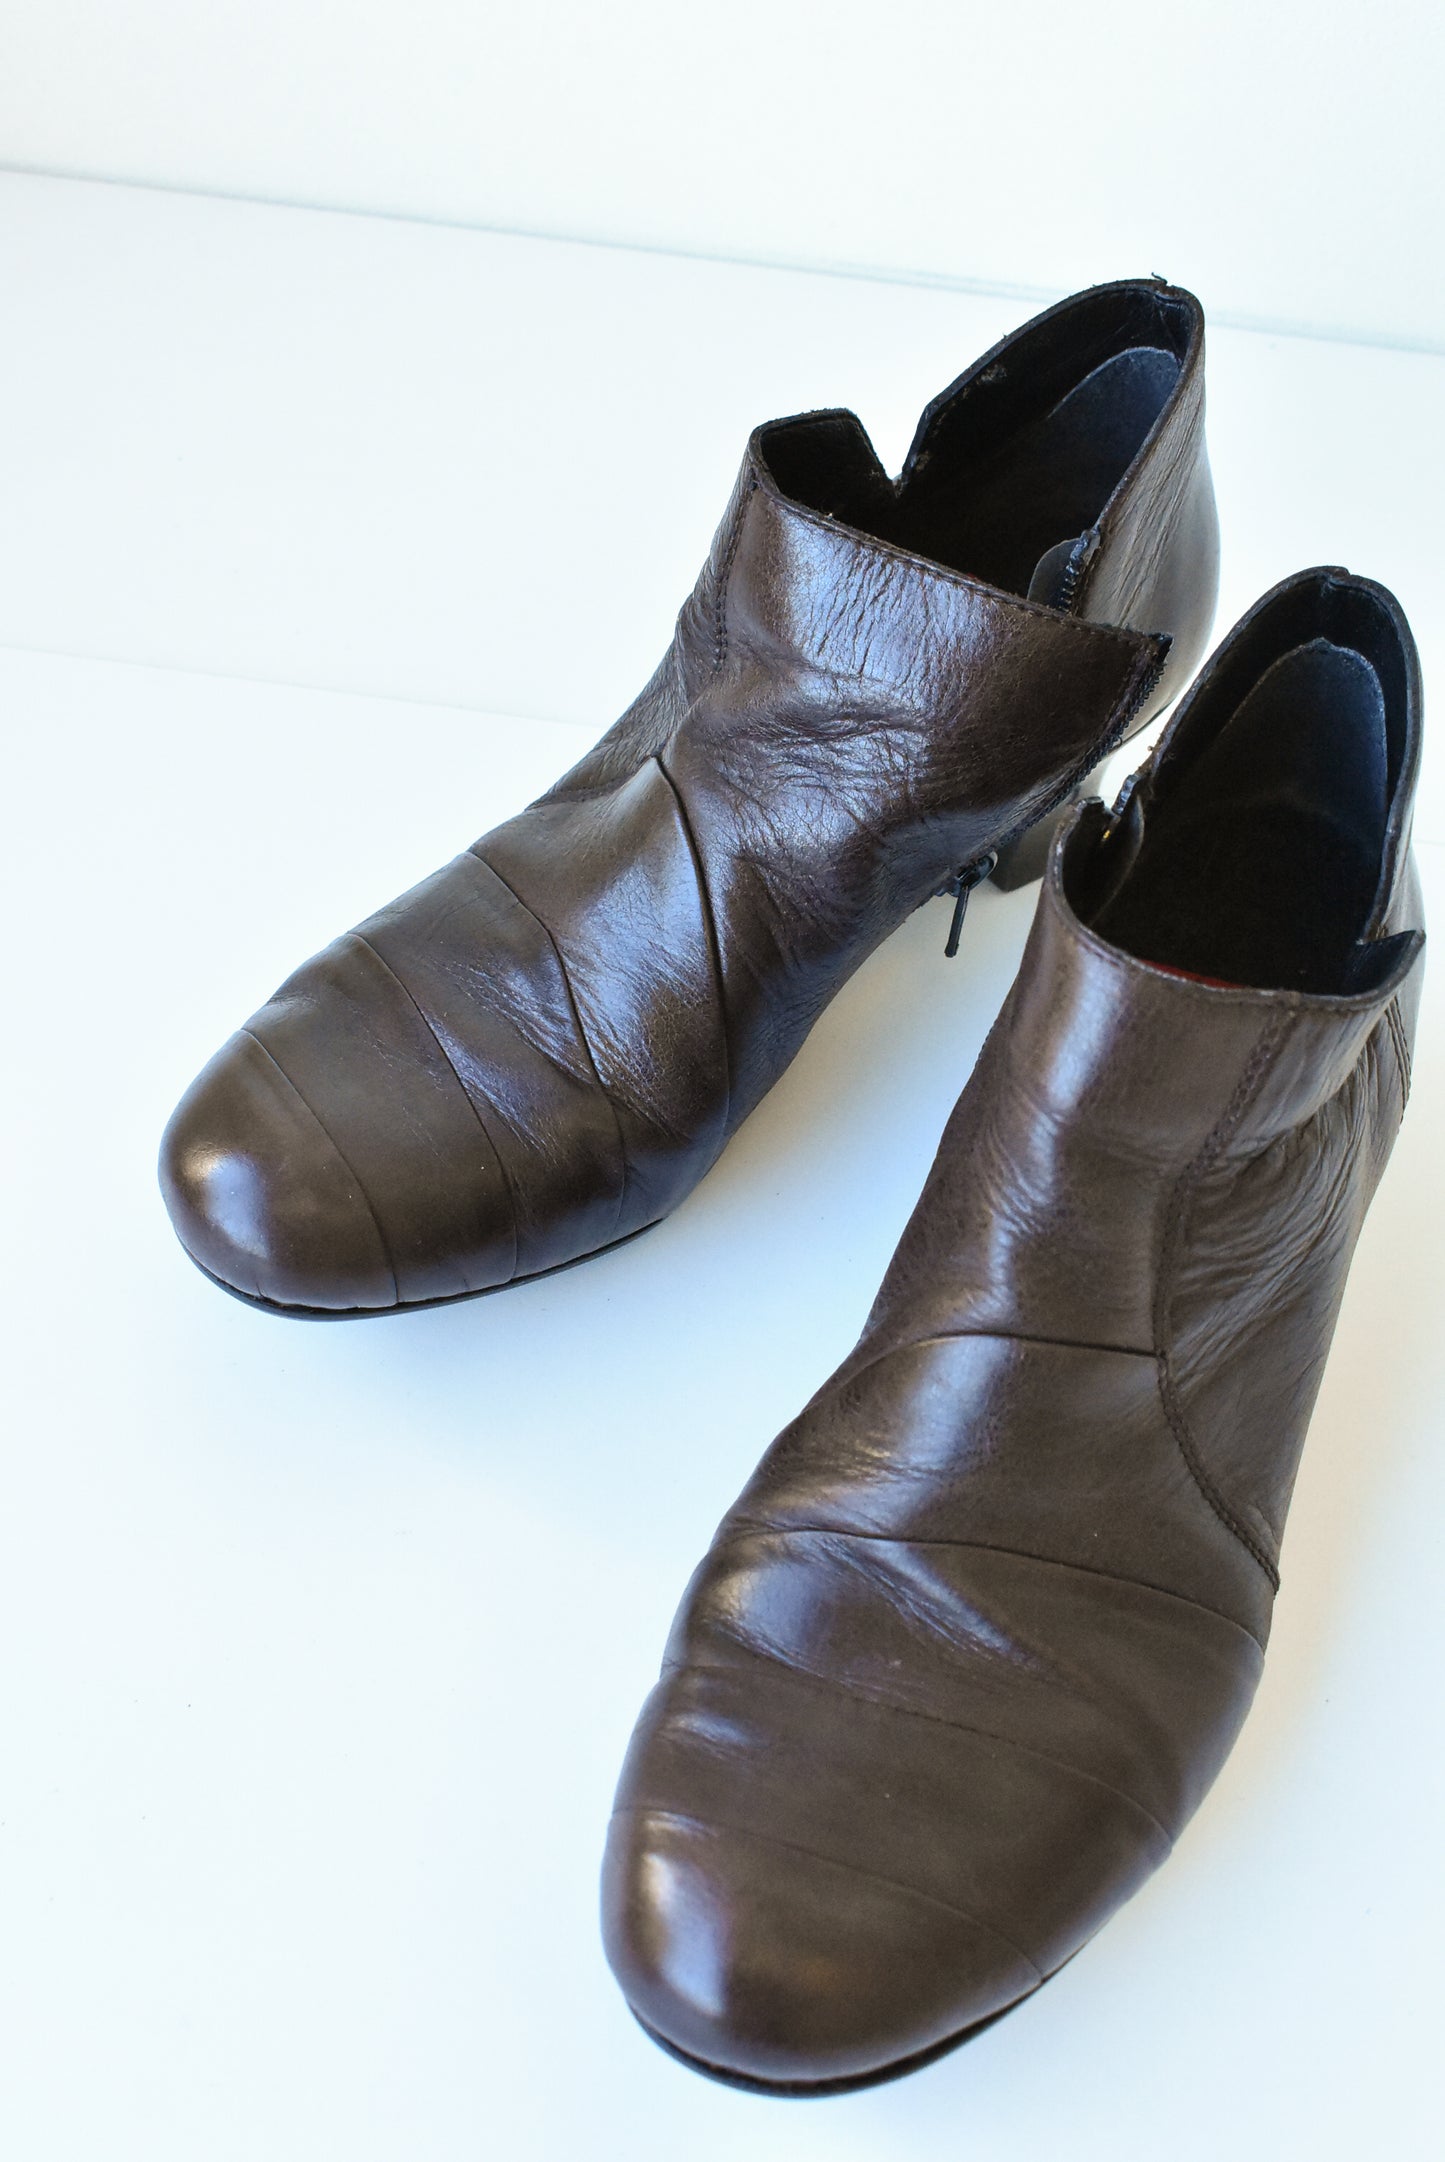 Rieker brown leather boots, 39